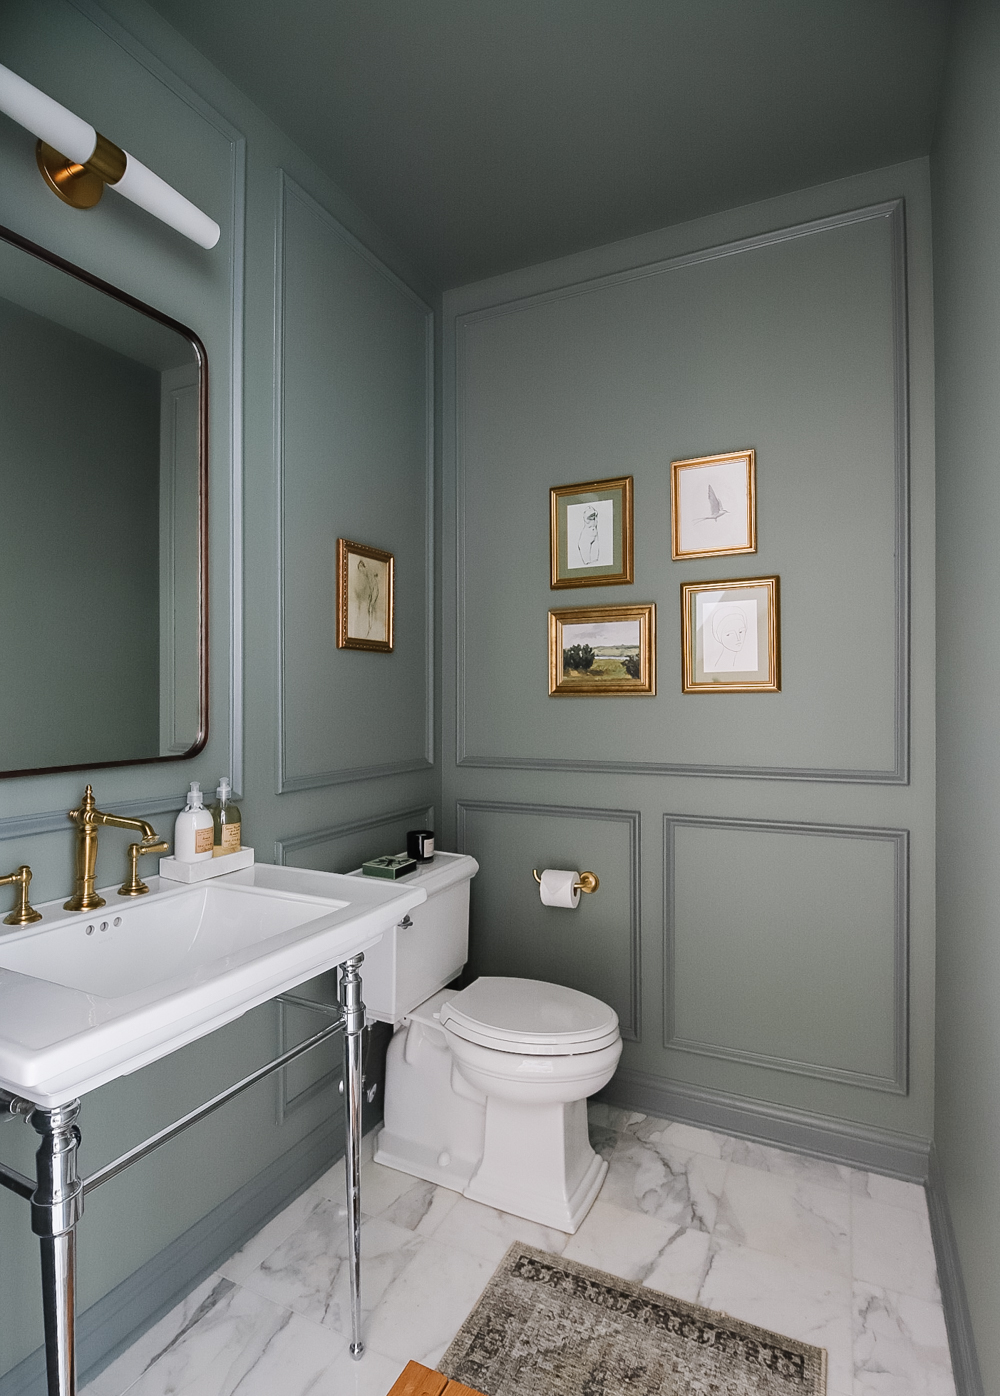 Choose the appropriate with bathroom
paint ideas